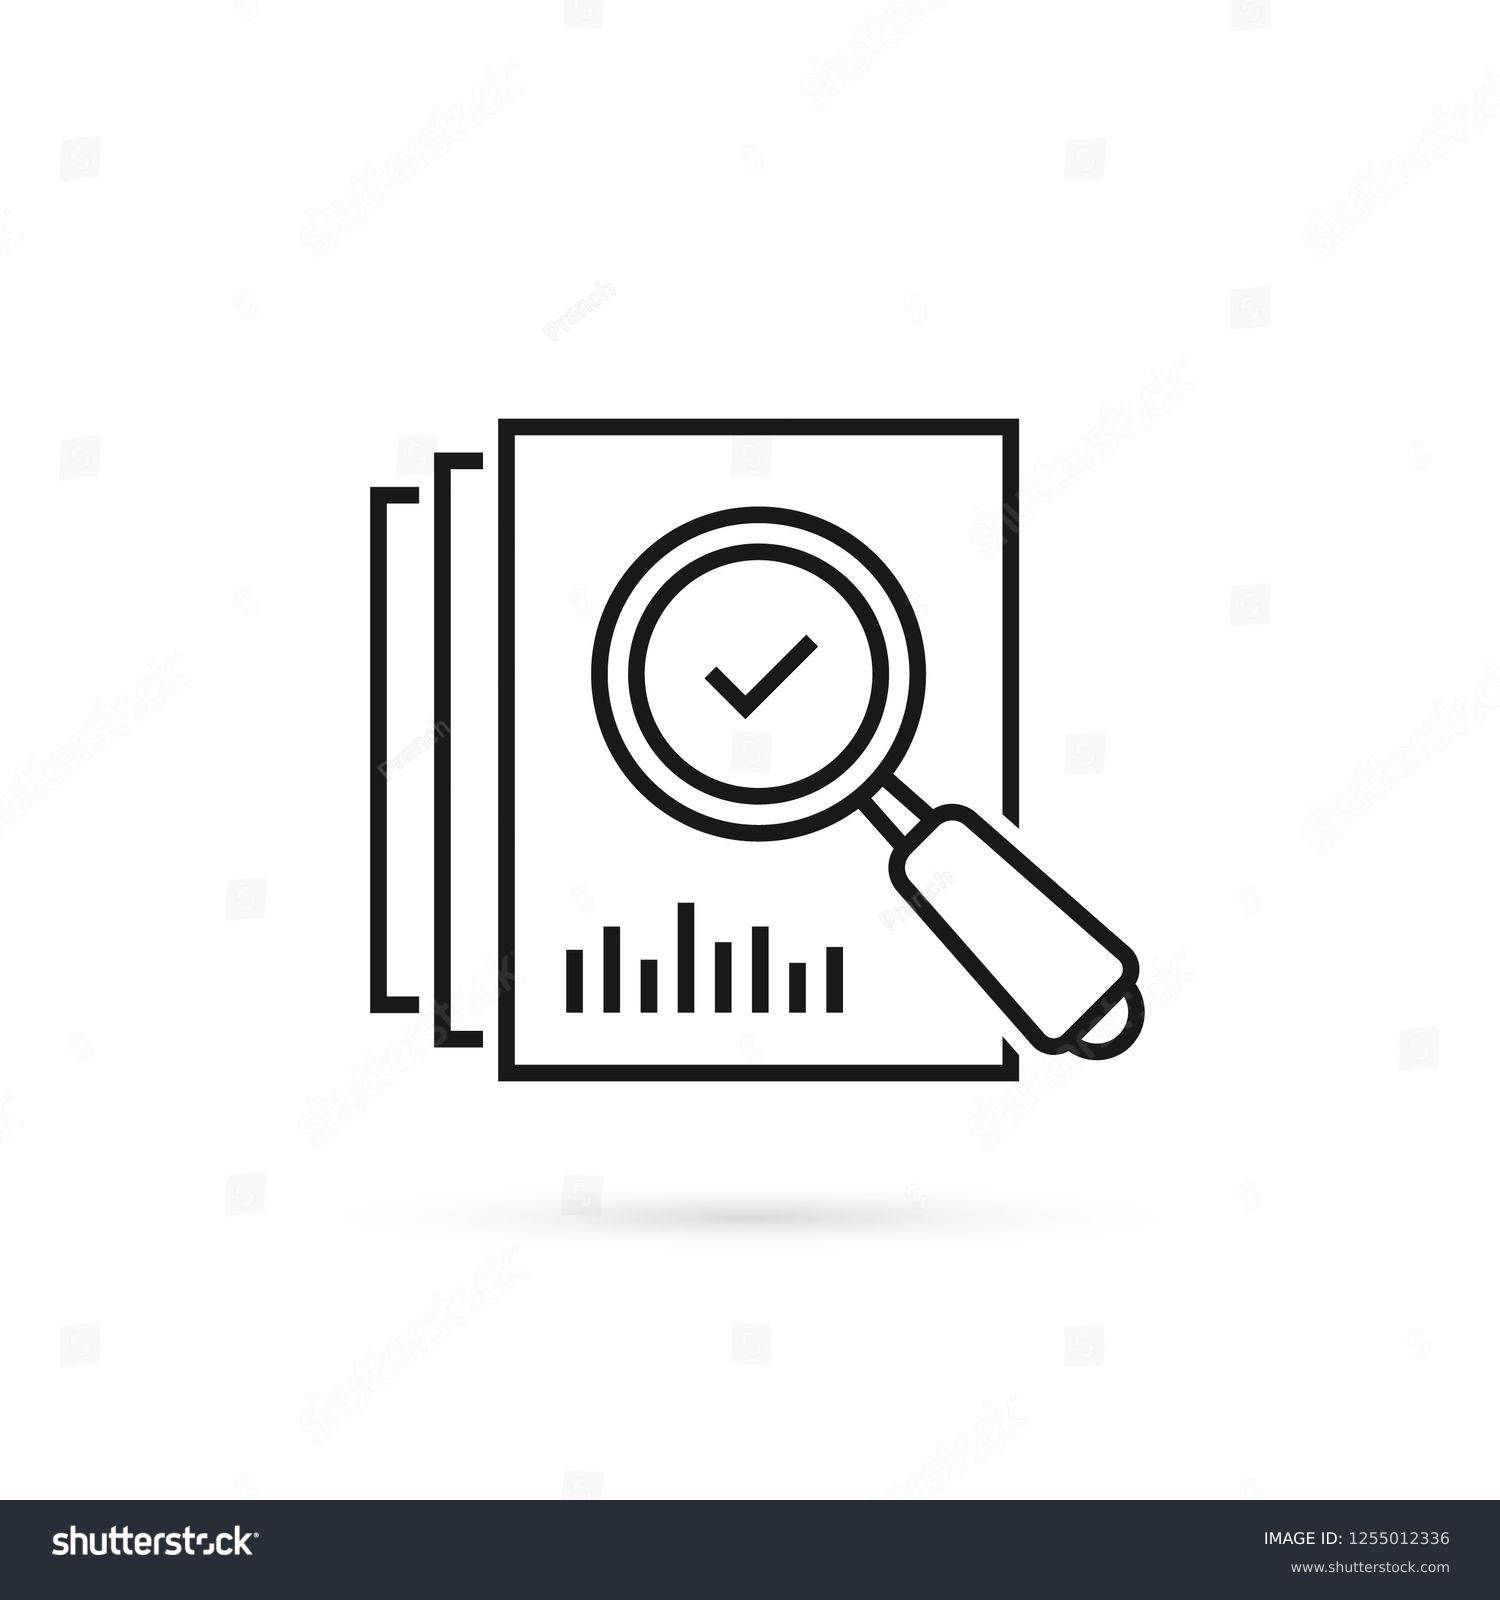 SVG of review icon like thin line loupe on paper. concept of market data statistics research or business forecast. flat stroke seek logotype graphic lineart black design art isolated on white background svg